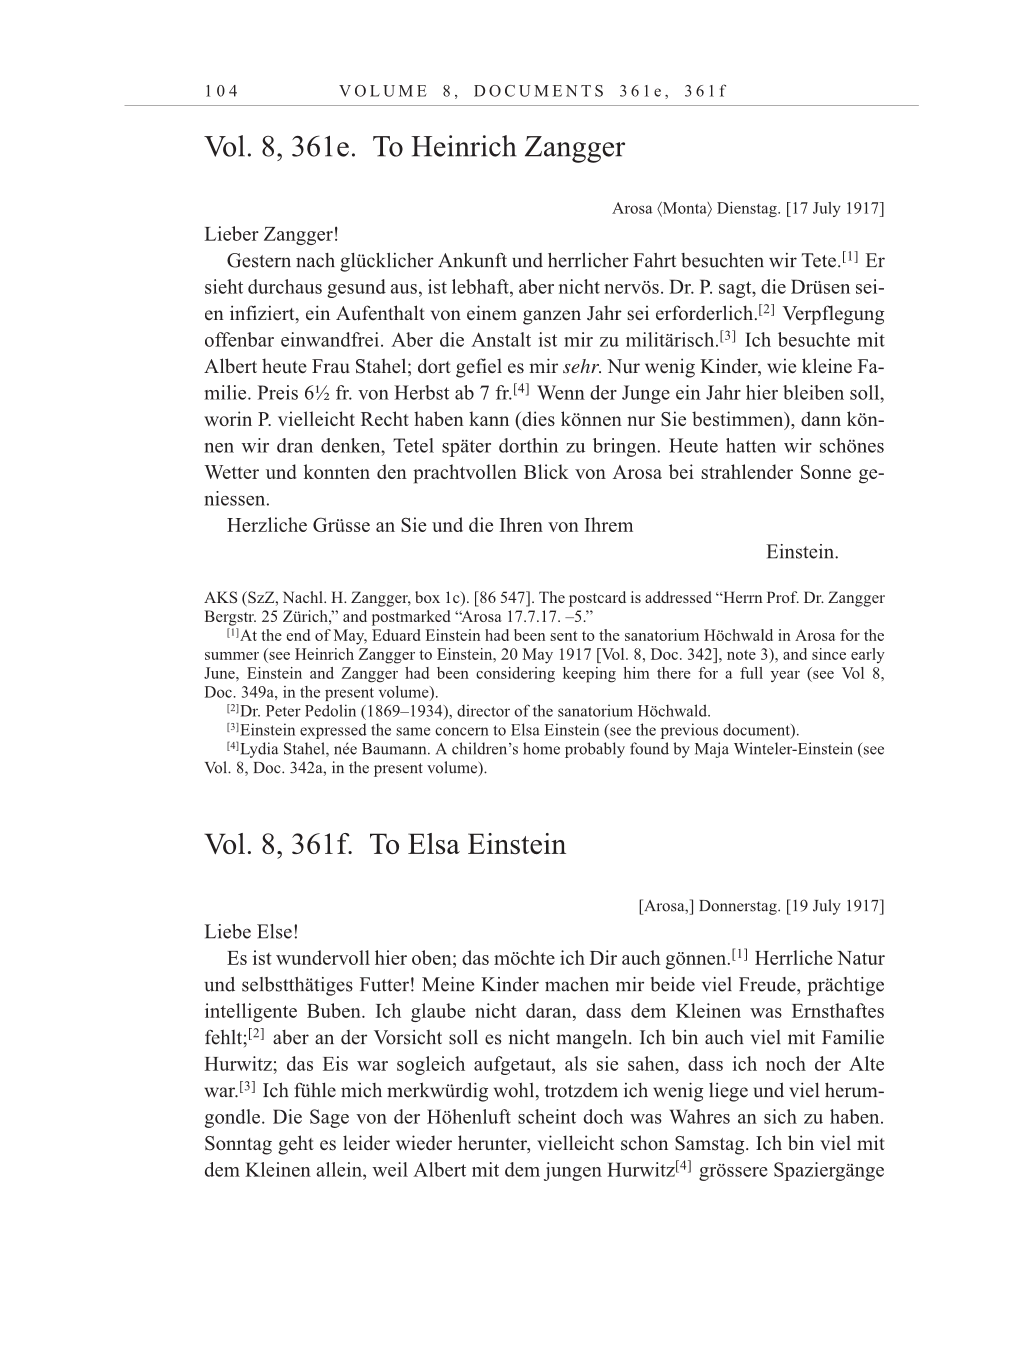 Volume 10: The Berlin Years: Correspondence May-December 1920 / Supplementary Correspondence 1909-1920 page 104